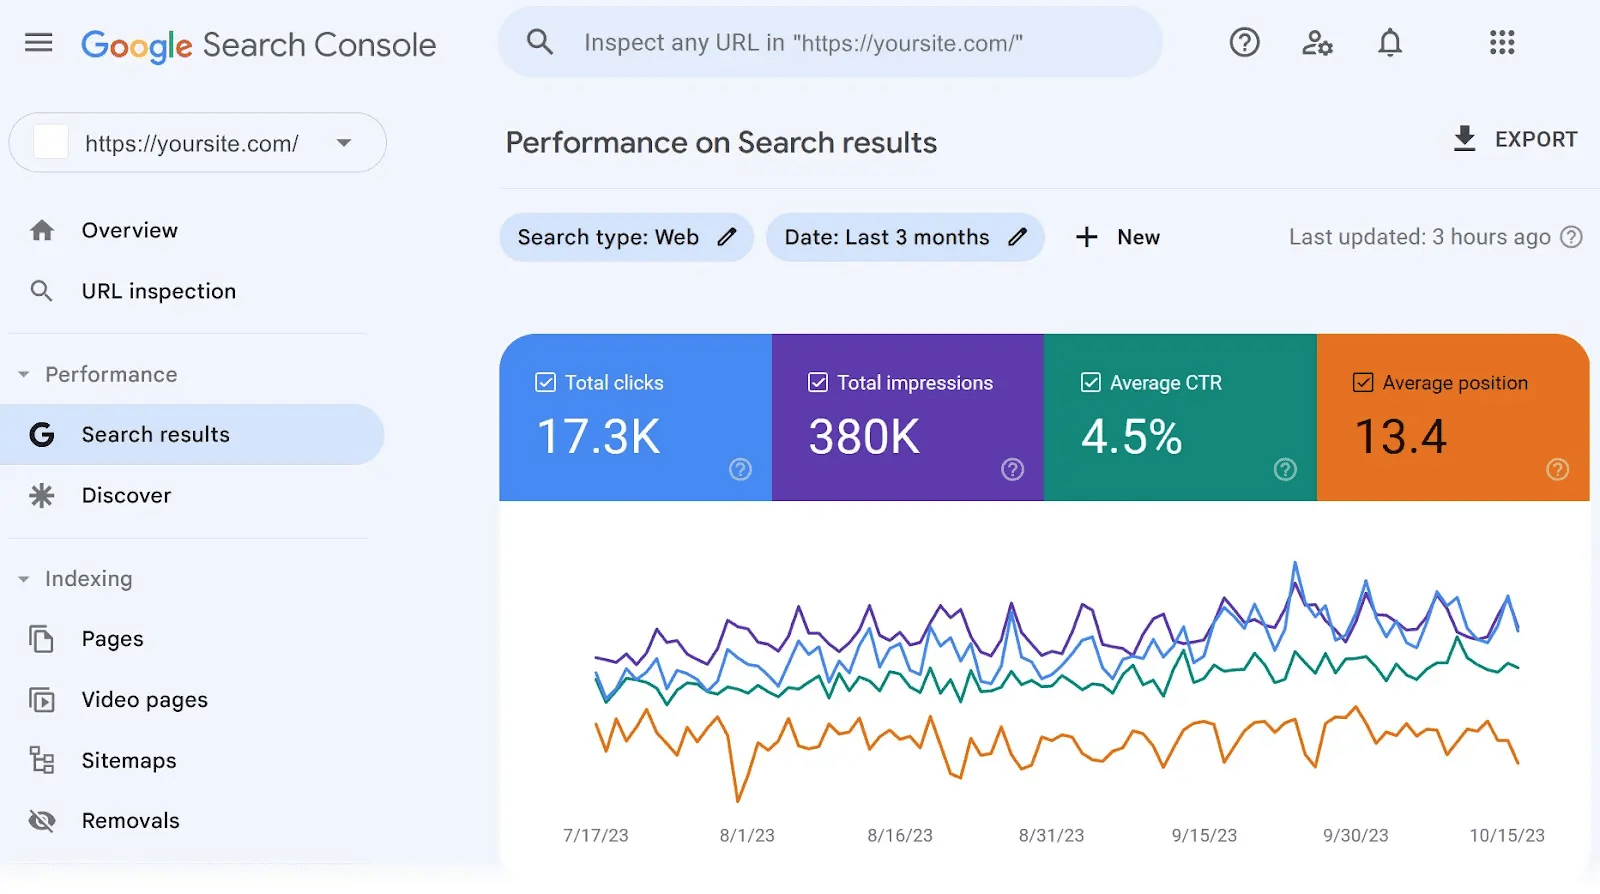 "Performance on Search results" page in Google Search Console